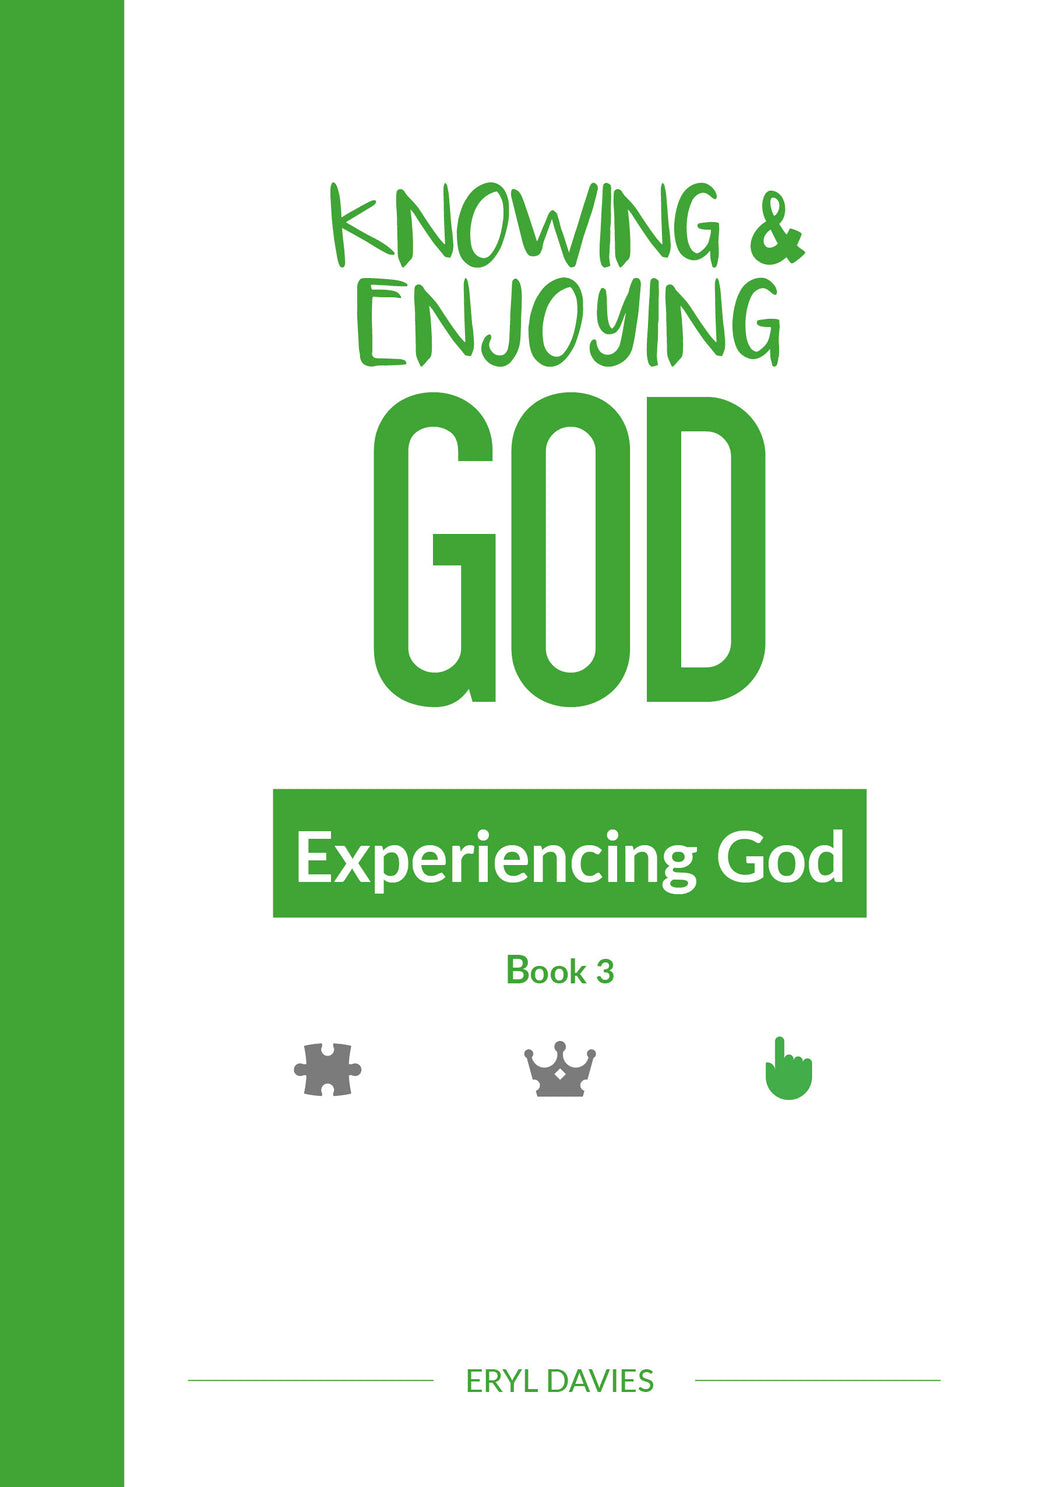 Experiencing God (Book 3: Knowing and Enjoying God)